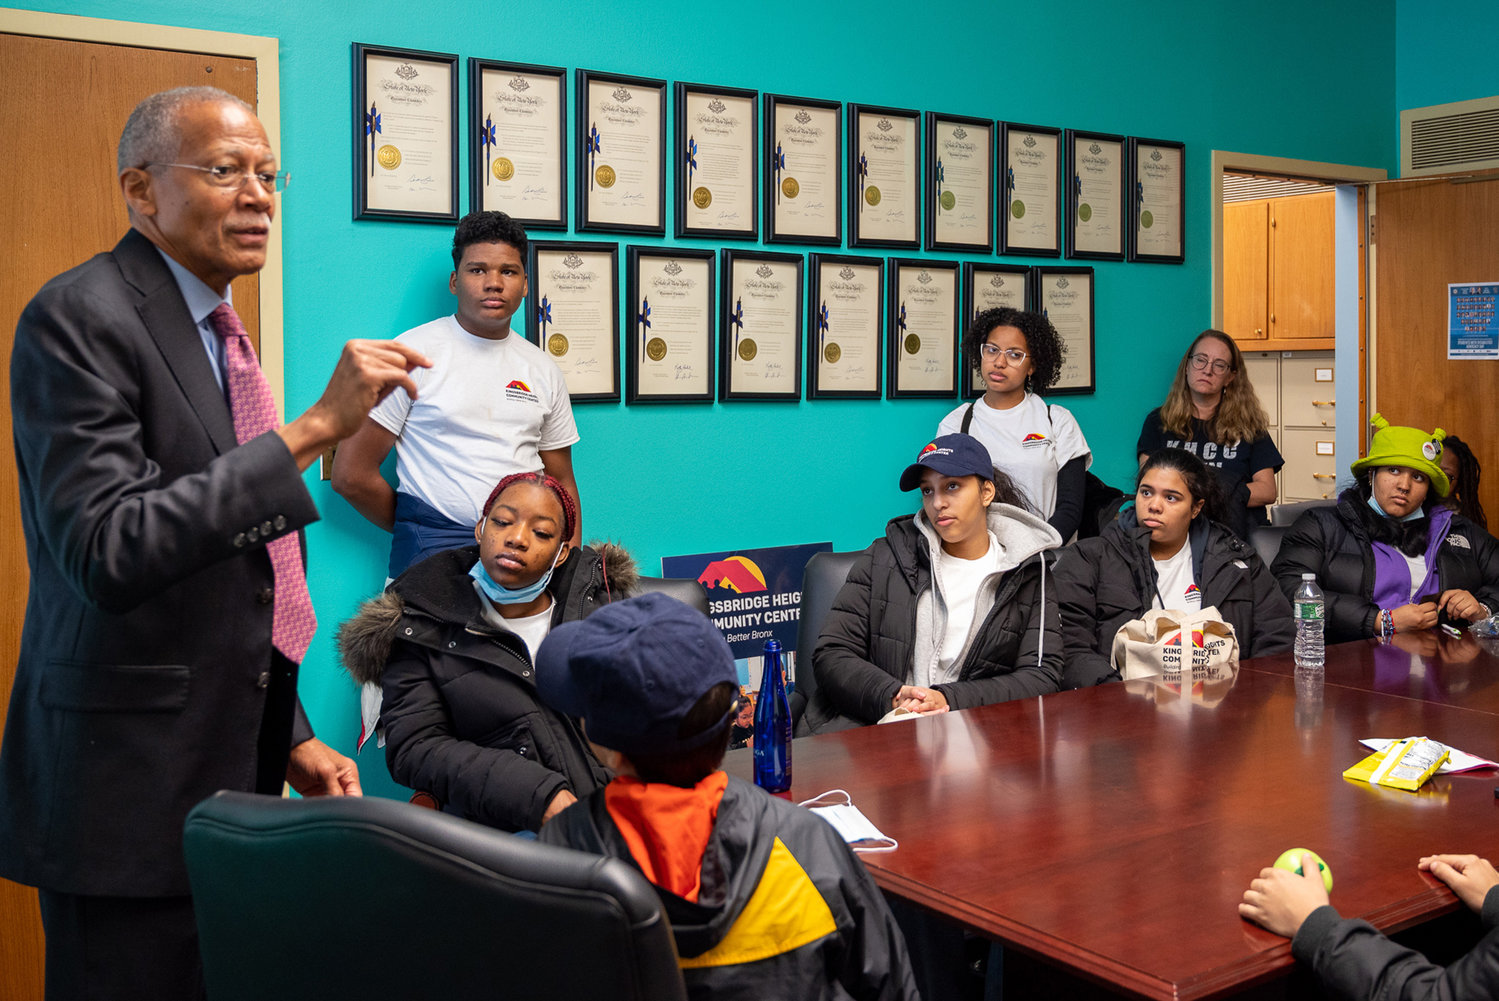 State Sen. Robert Jackson speaks with teens from the Kingsbridge Heights Community Center Youth Leadership Council Jan. 25 in his Albany office to discuss increasing funding for afterschool programs. The trip was organized by New York State Network for Youth Success.